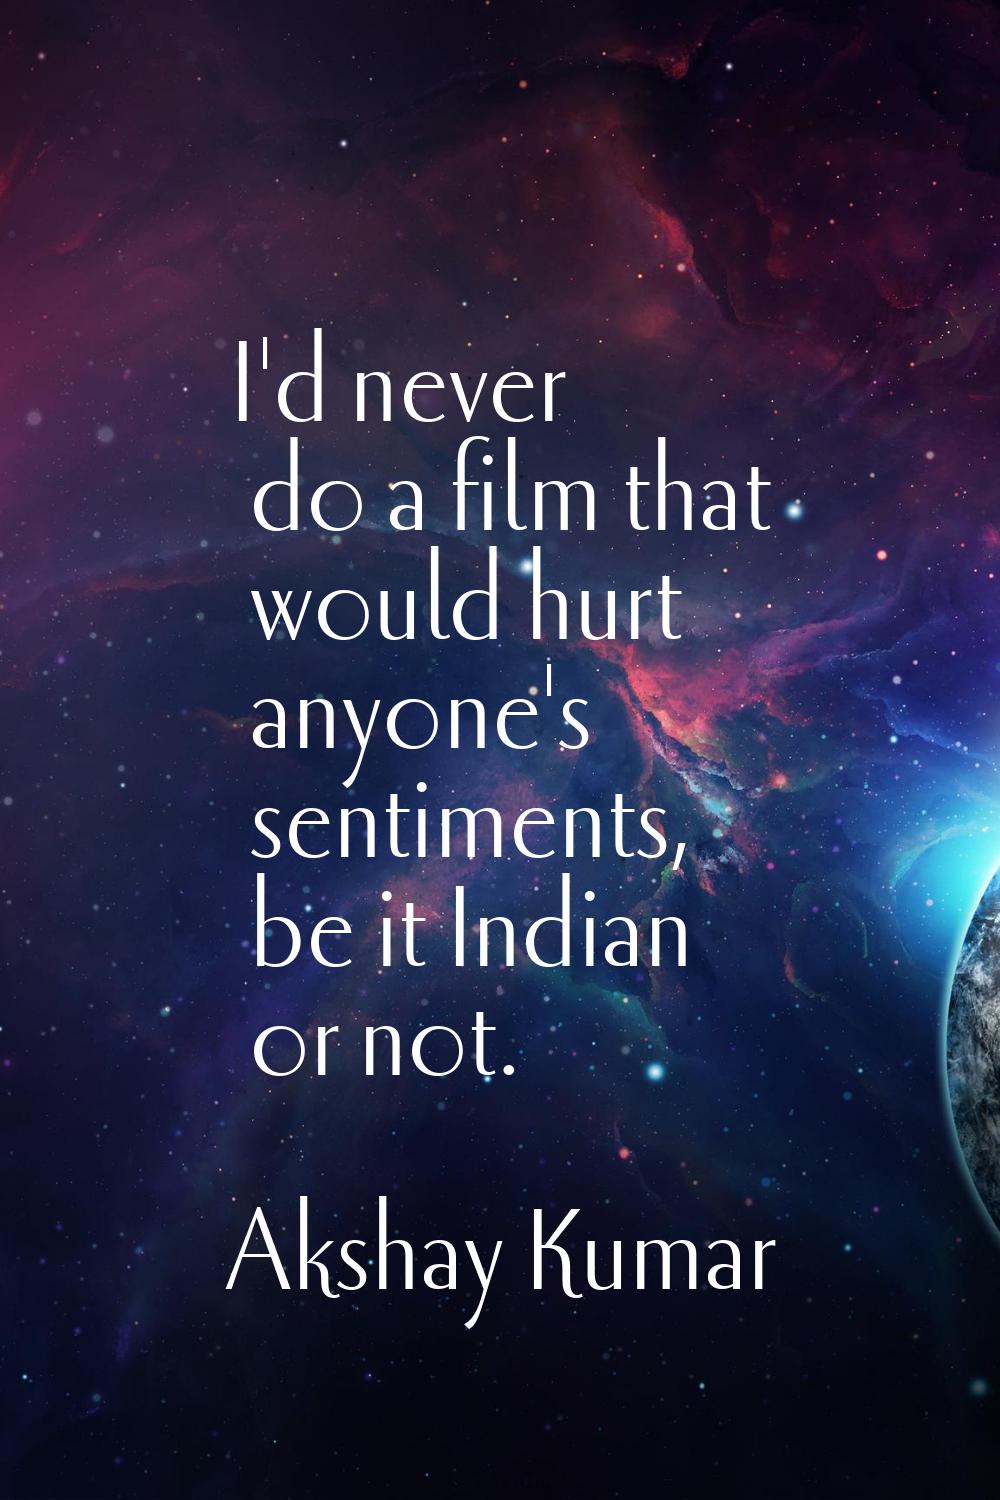 I'd never do a film that would hurt anyone's sentiments, be it Indian or not.